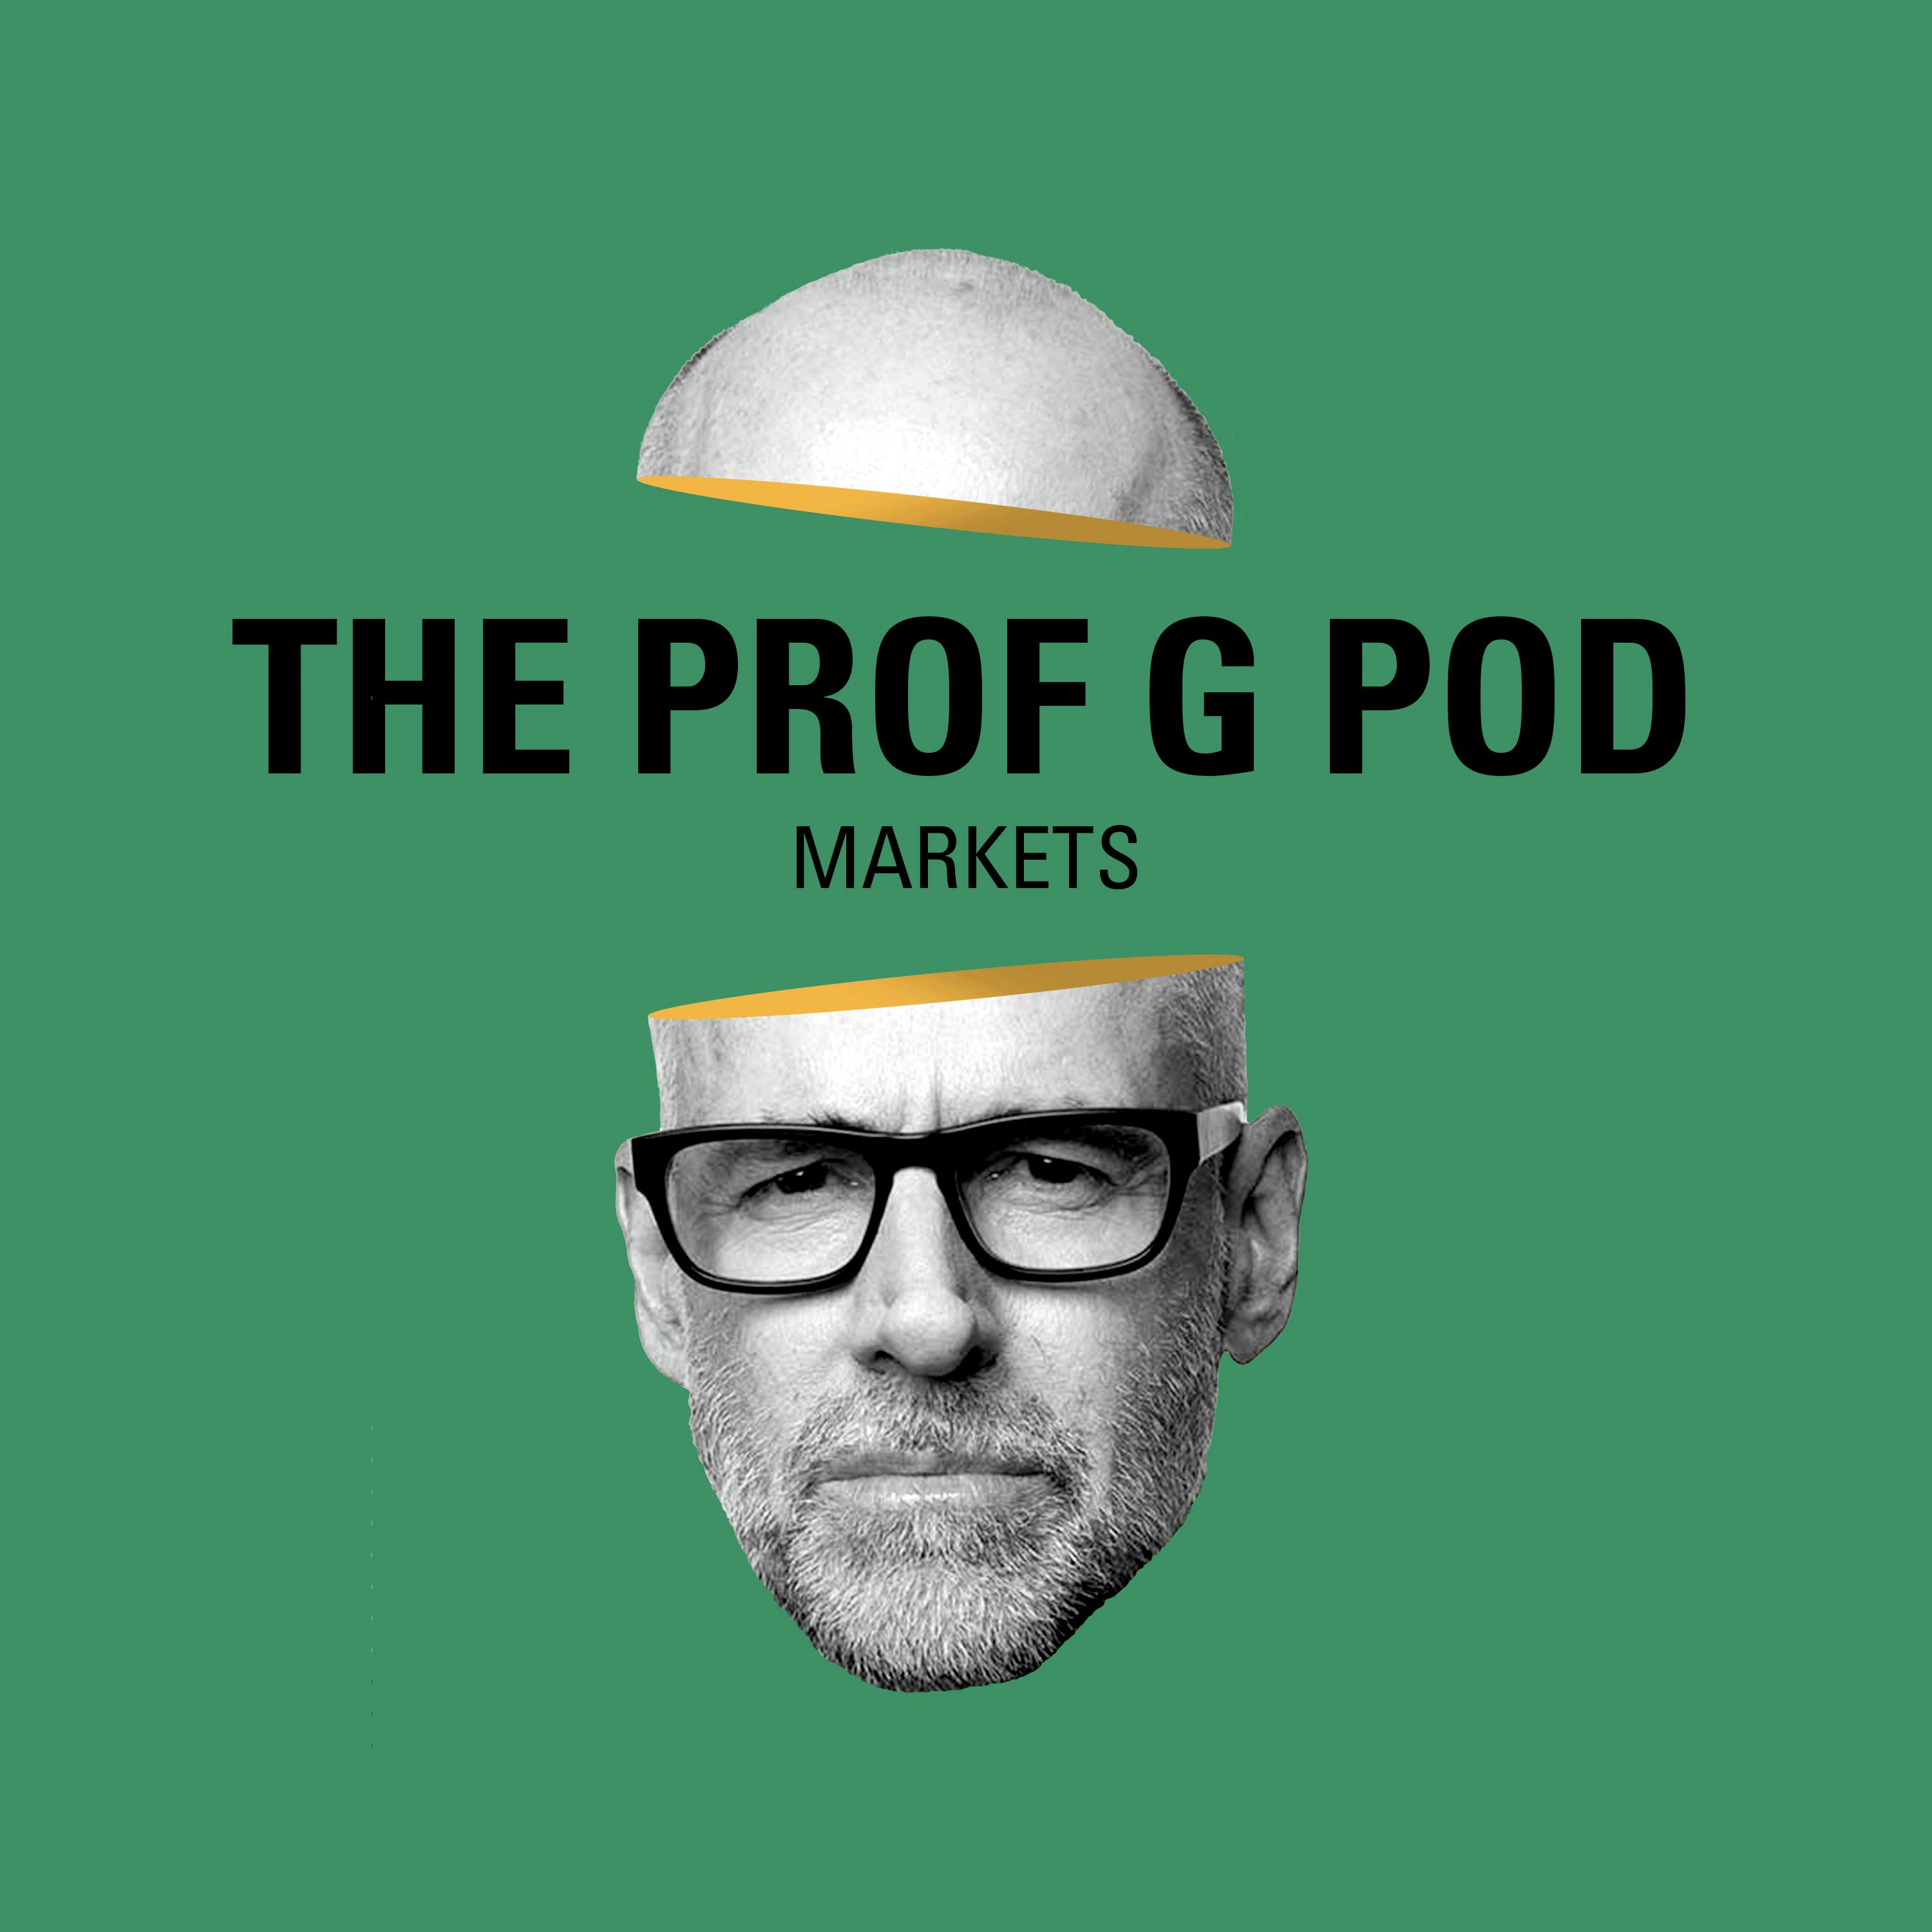 Prof G Markets: Target and Walmart Earnings, Hedge Funds and Pinterest, and Estée Lauder Buys Tom Ford